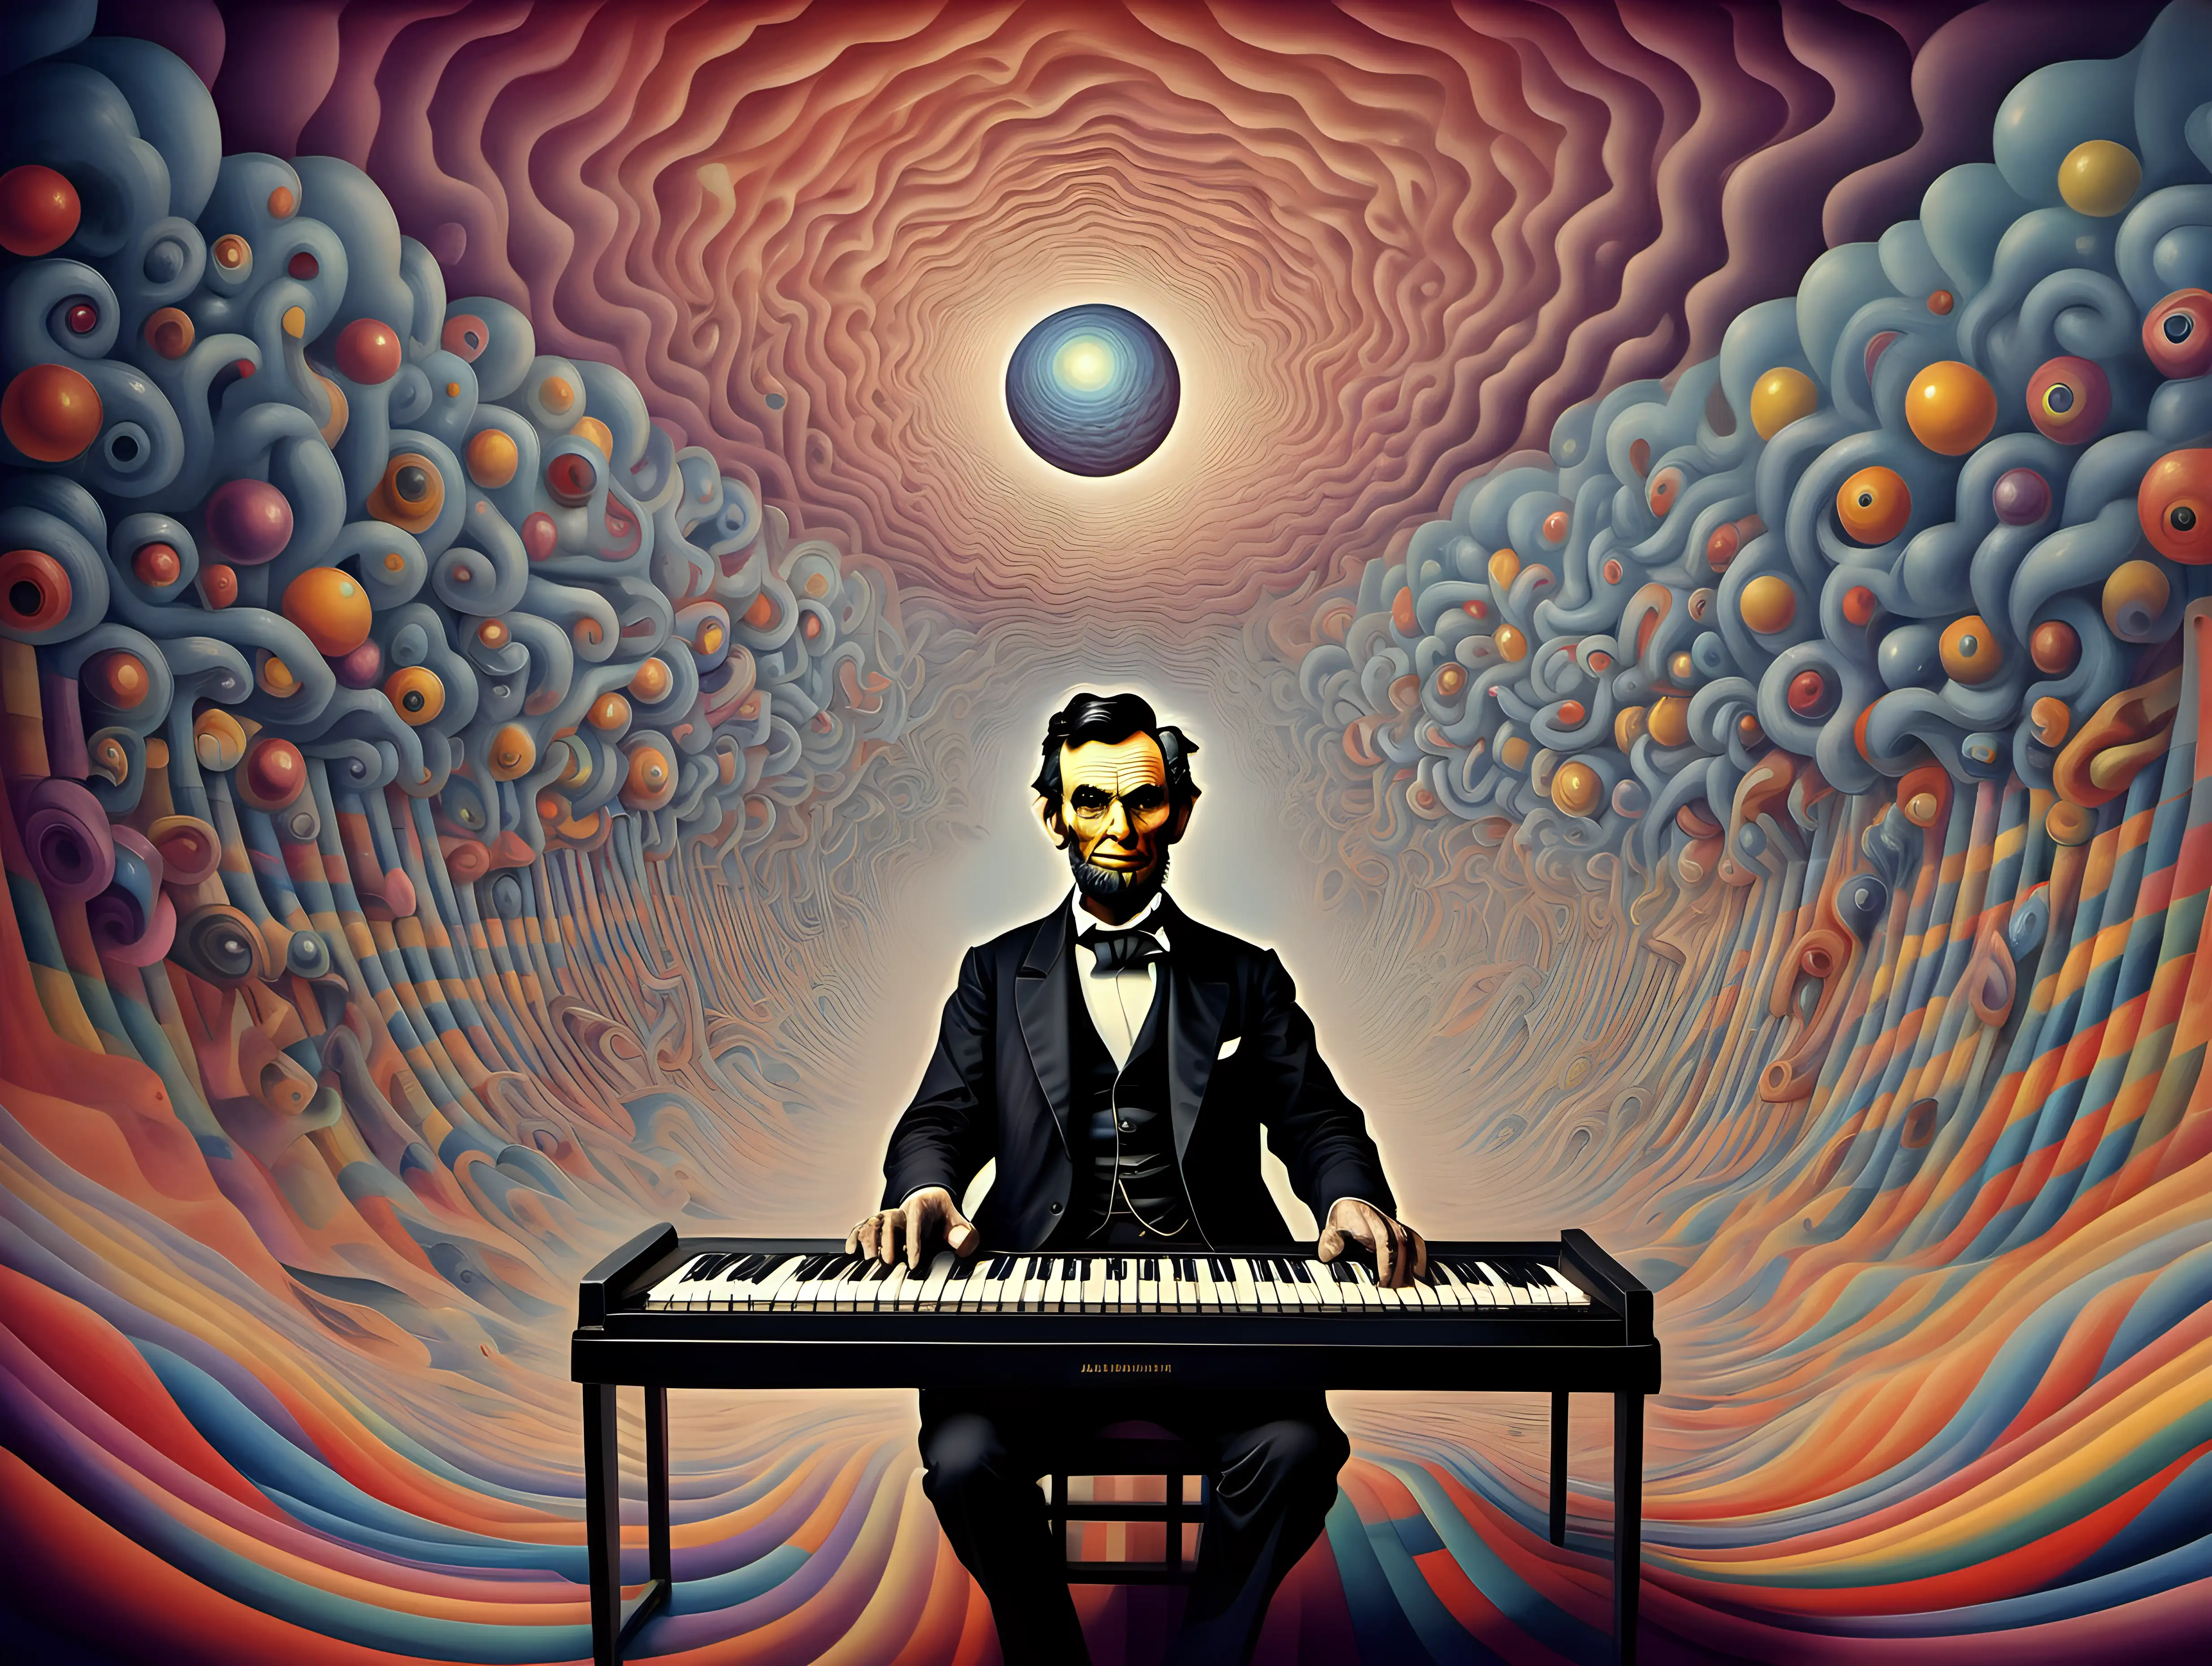 LSDInspired Surrealistic Keyboard Play by Abraham Lincoln